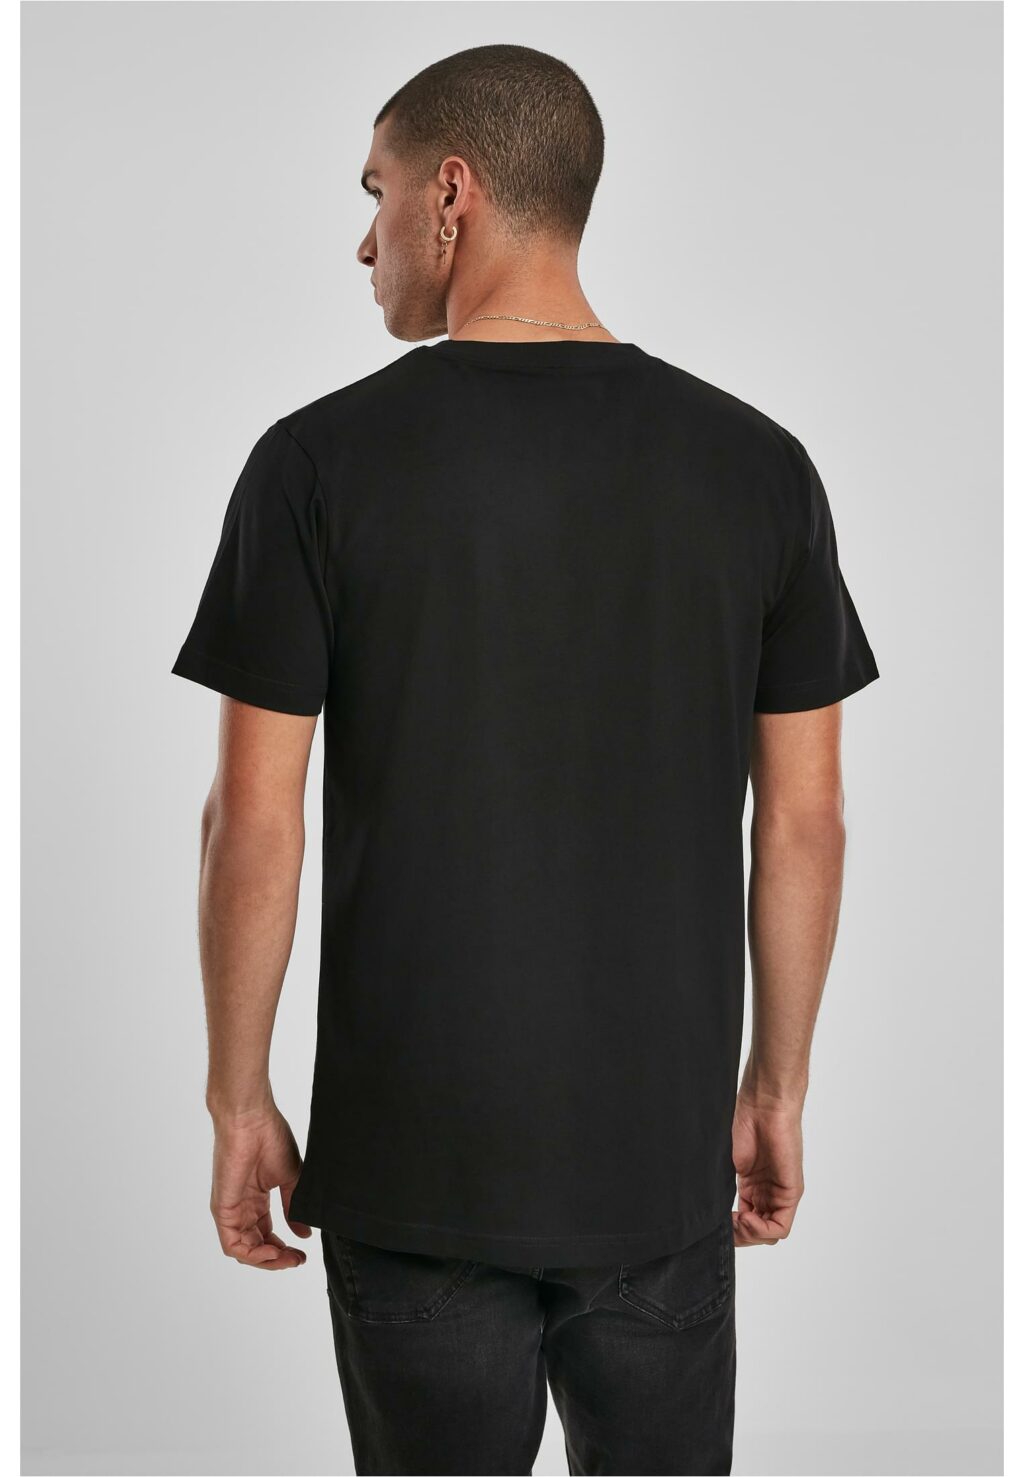 Can't Hang With Us Tee black MT1187